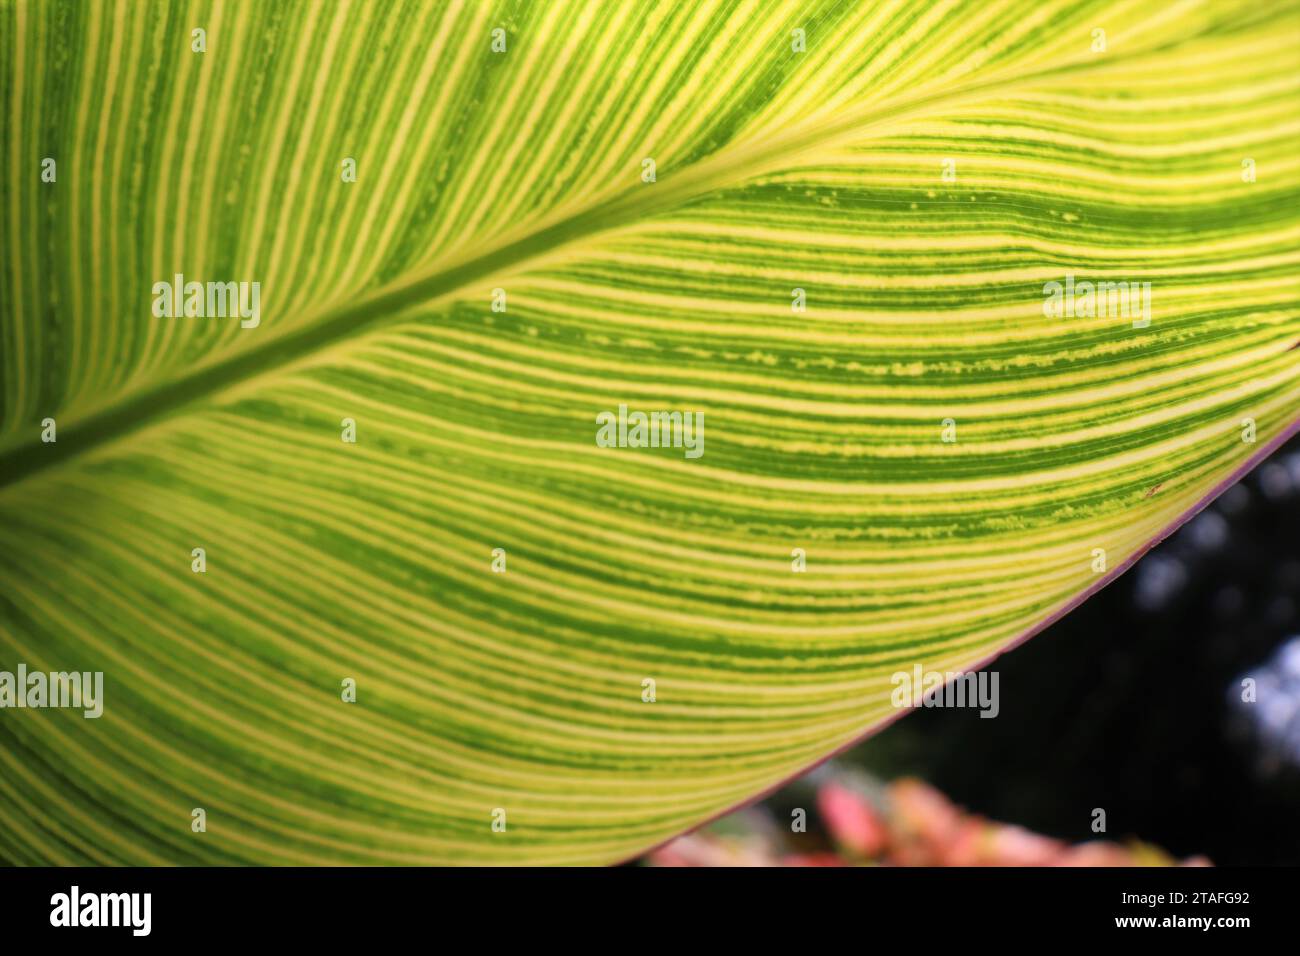 Yellow and Green Striped Leaf Stock Photo